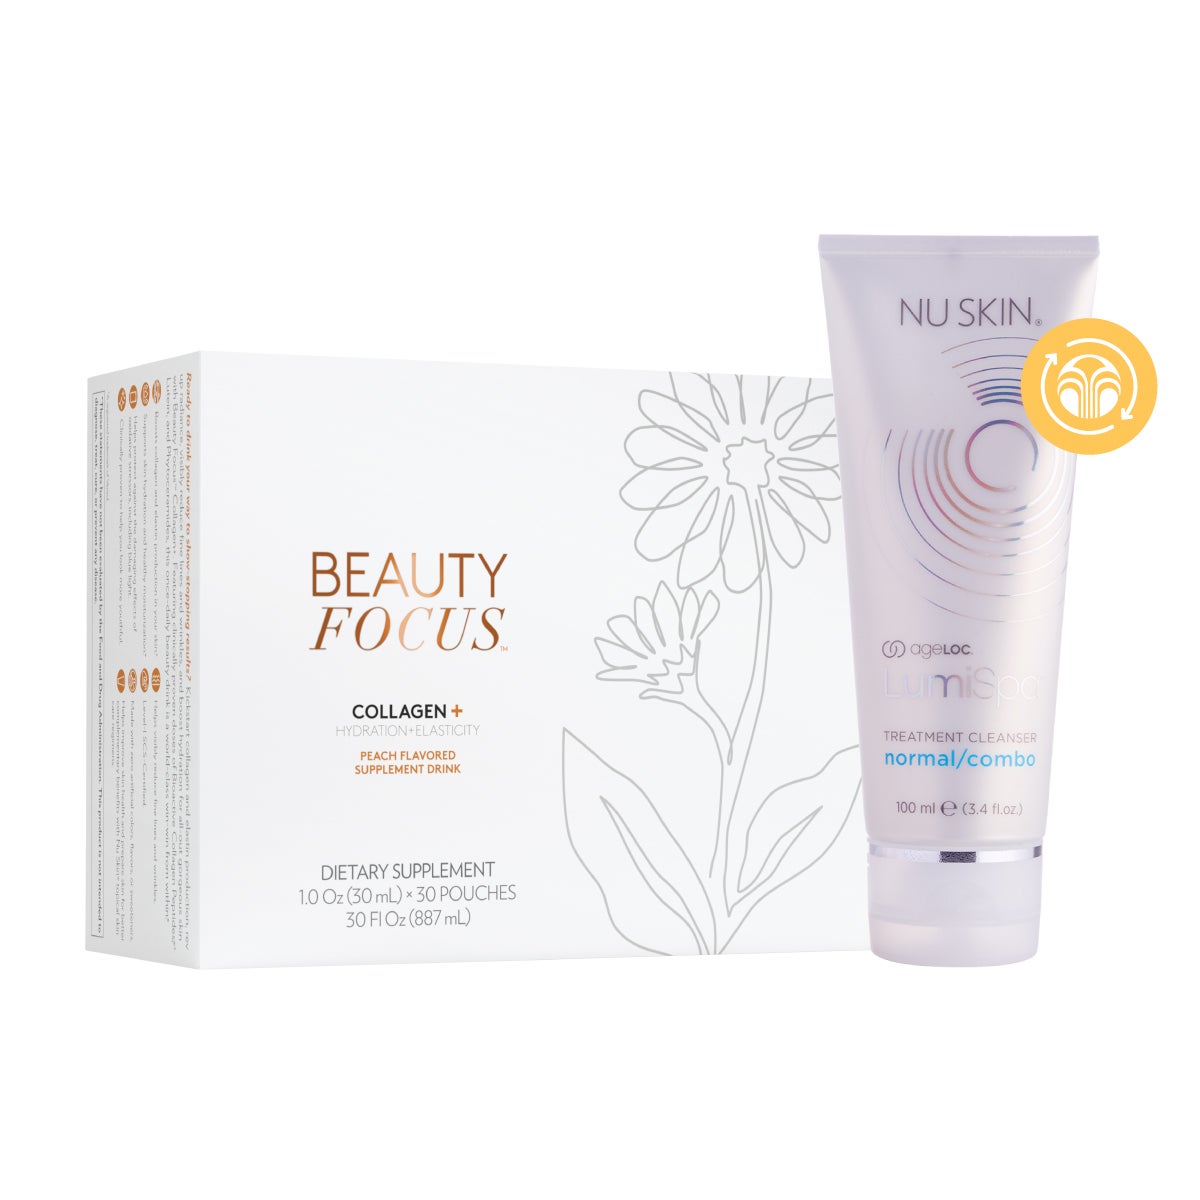 Beauty Focus™ Collagen+ Peach & ageLOC® LumiSpa® Cleanser (Normal/Combo) Subscription